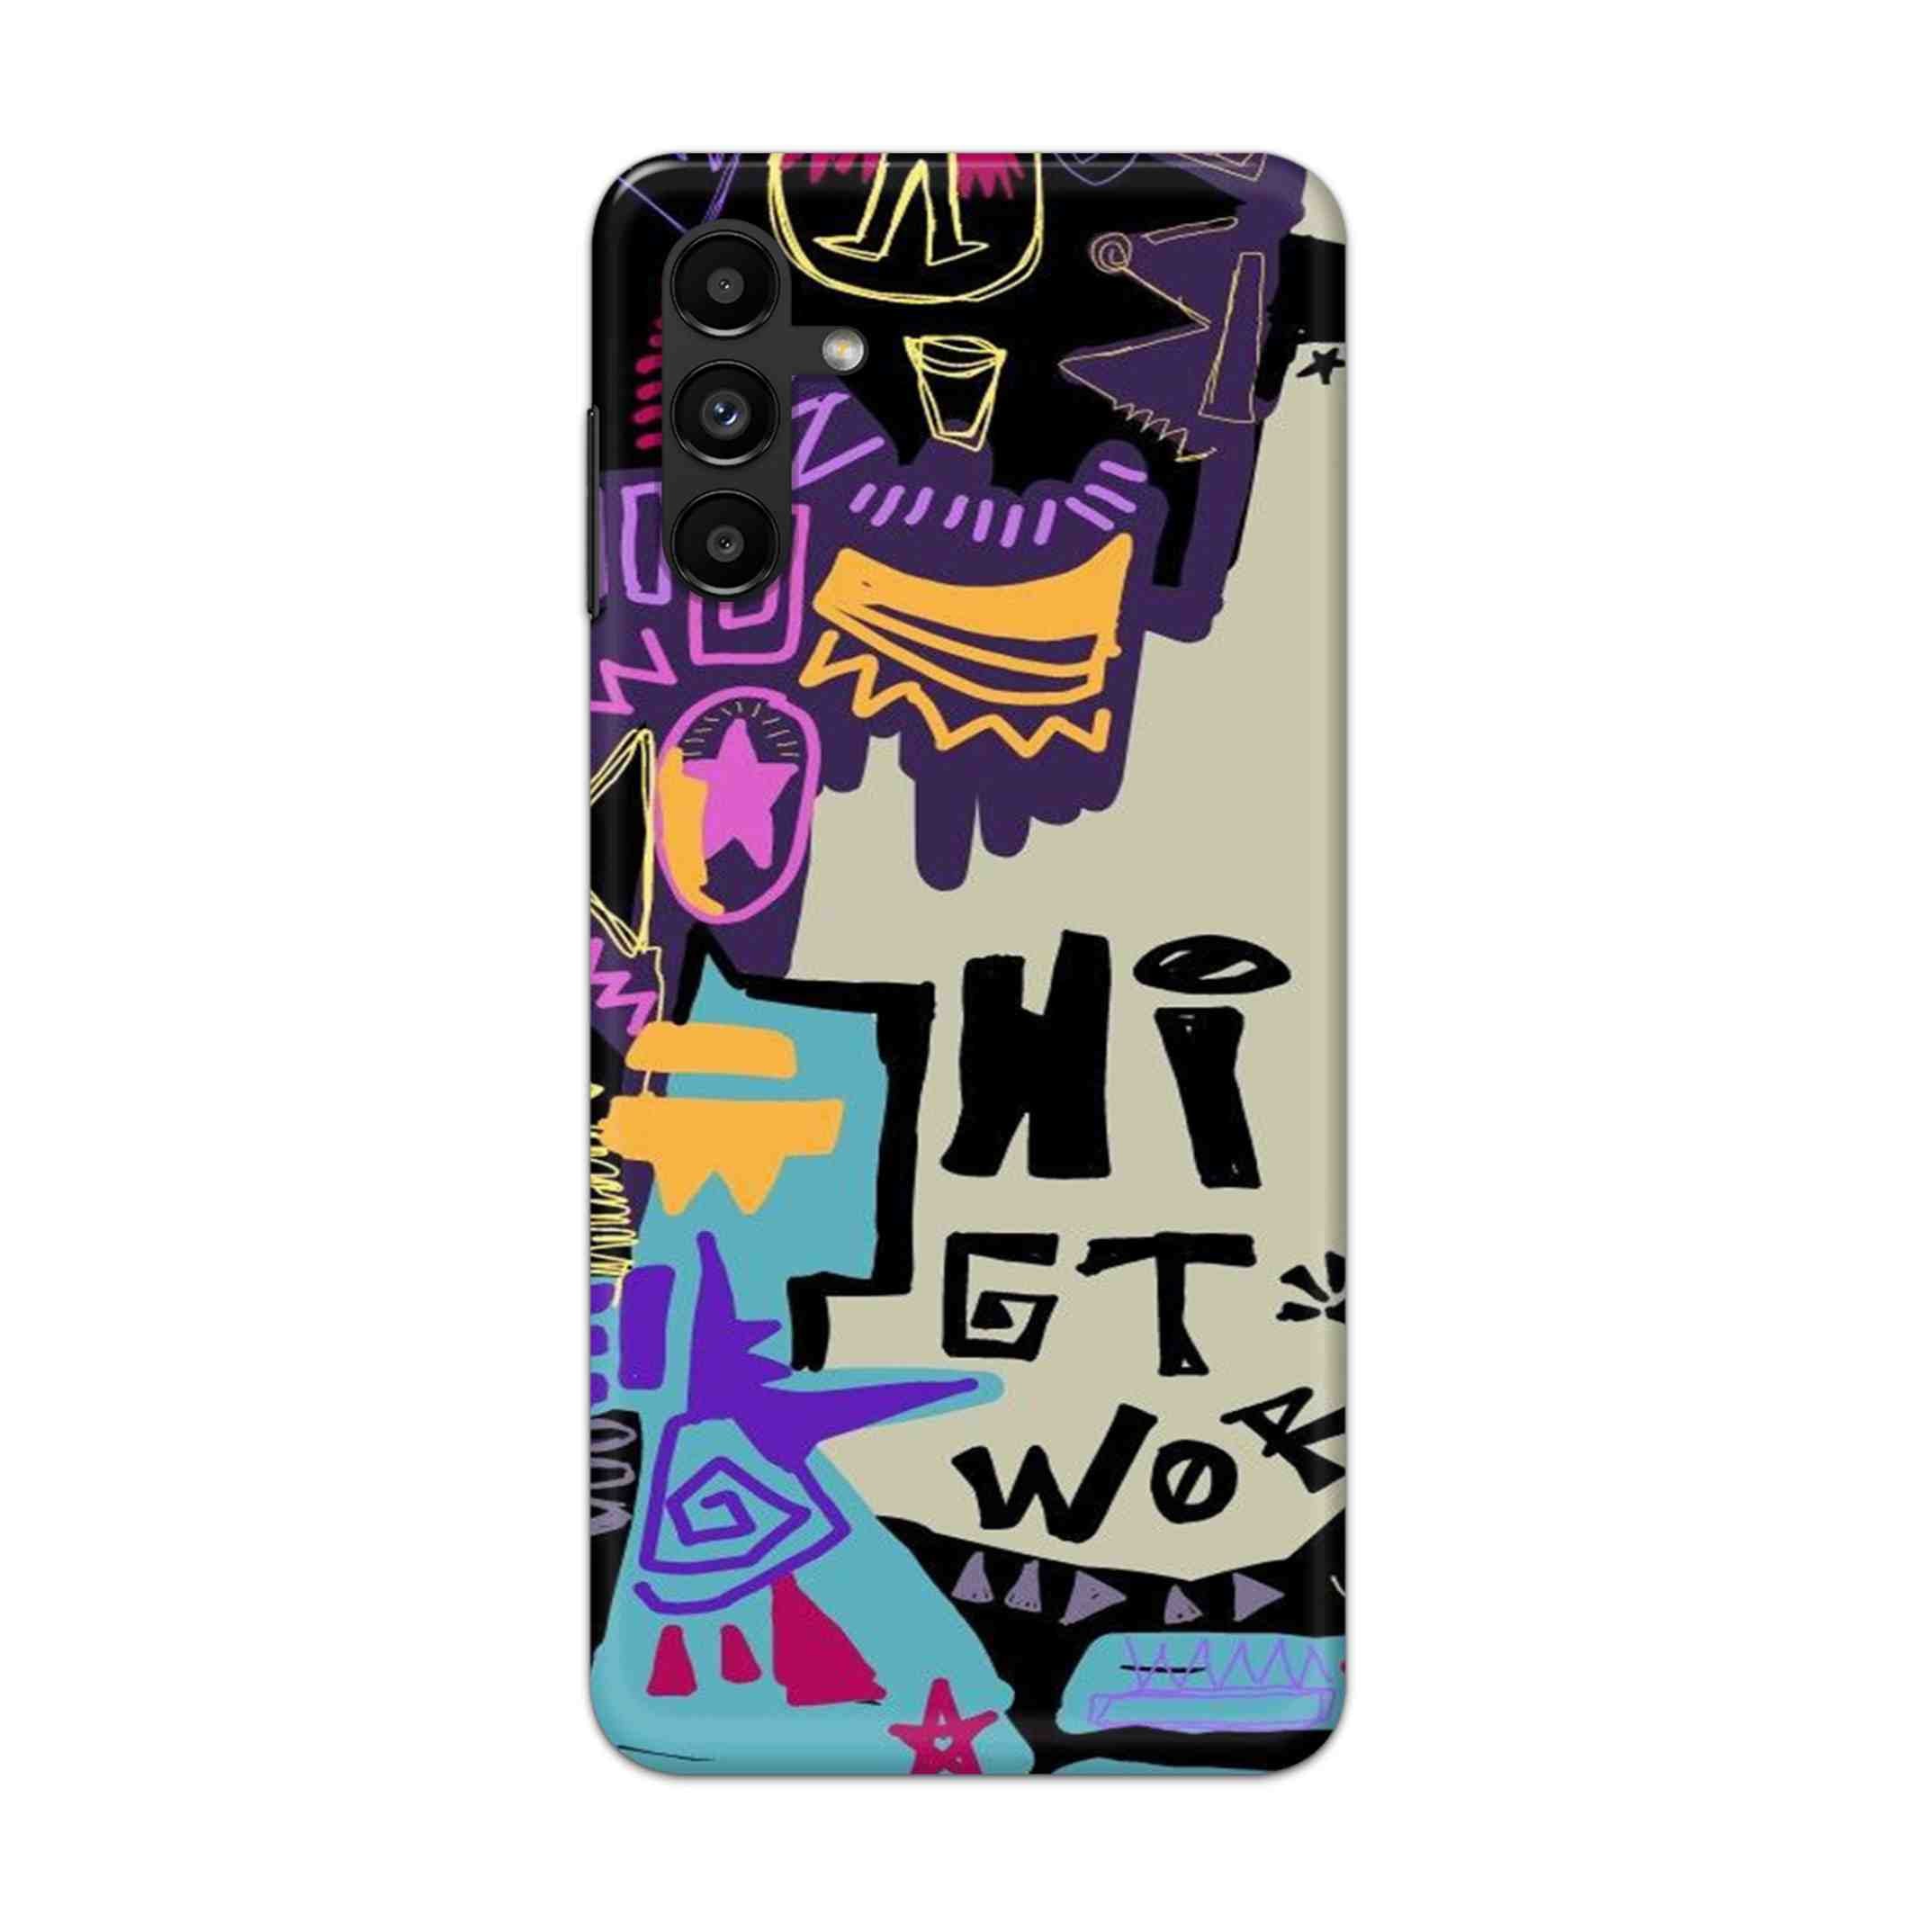 Buy Hi Gt World Hard Back Mobile Phone Case/Cover For Galaxy A13 (5G) Online